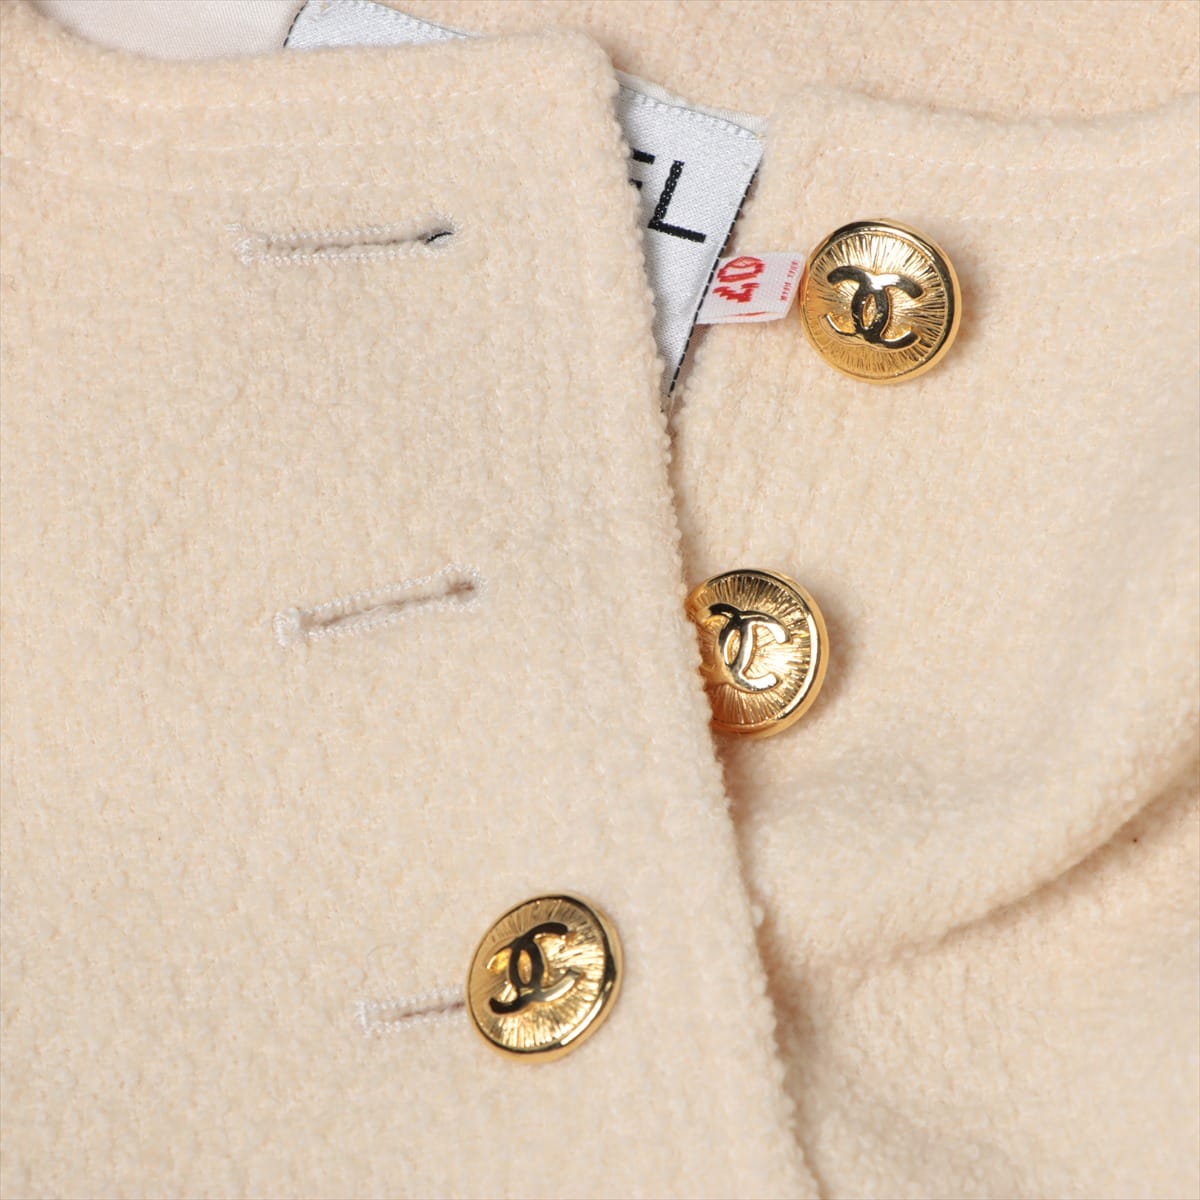 Chanel Coco Button Wool Setup 40 Ladies' Ivory